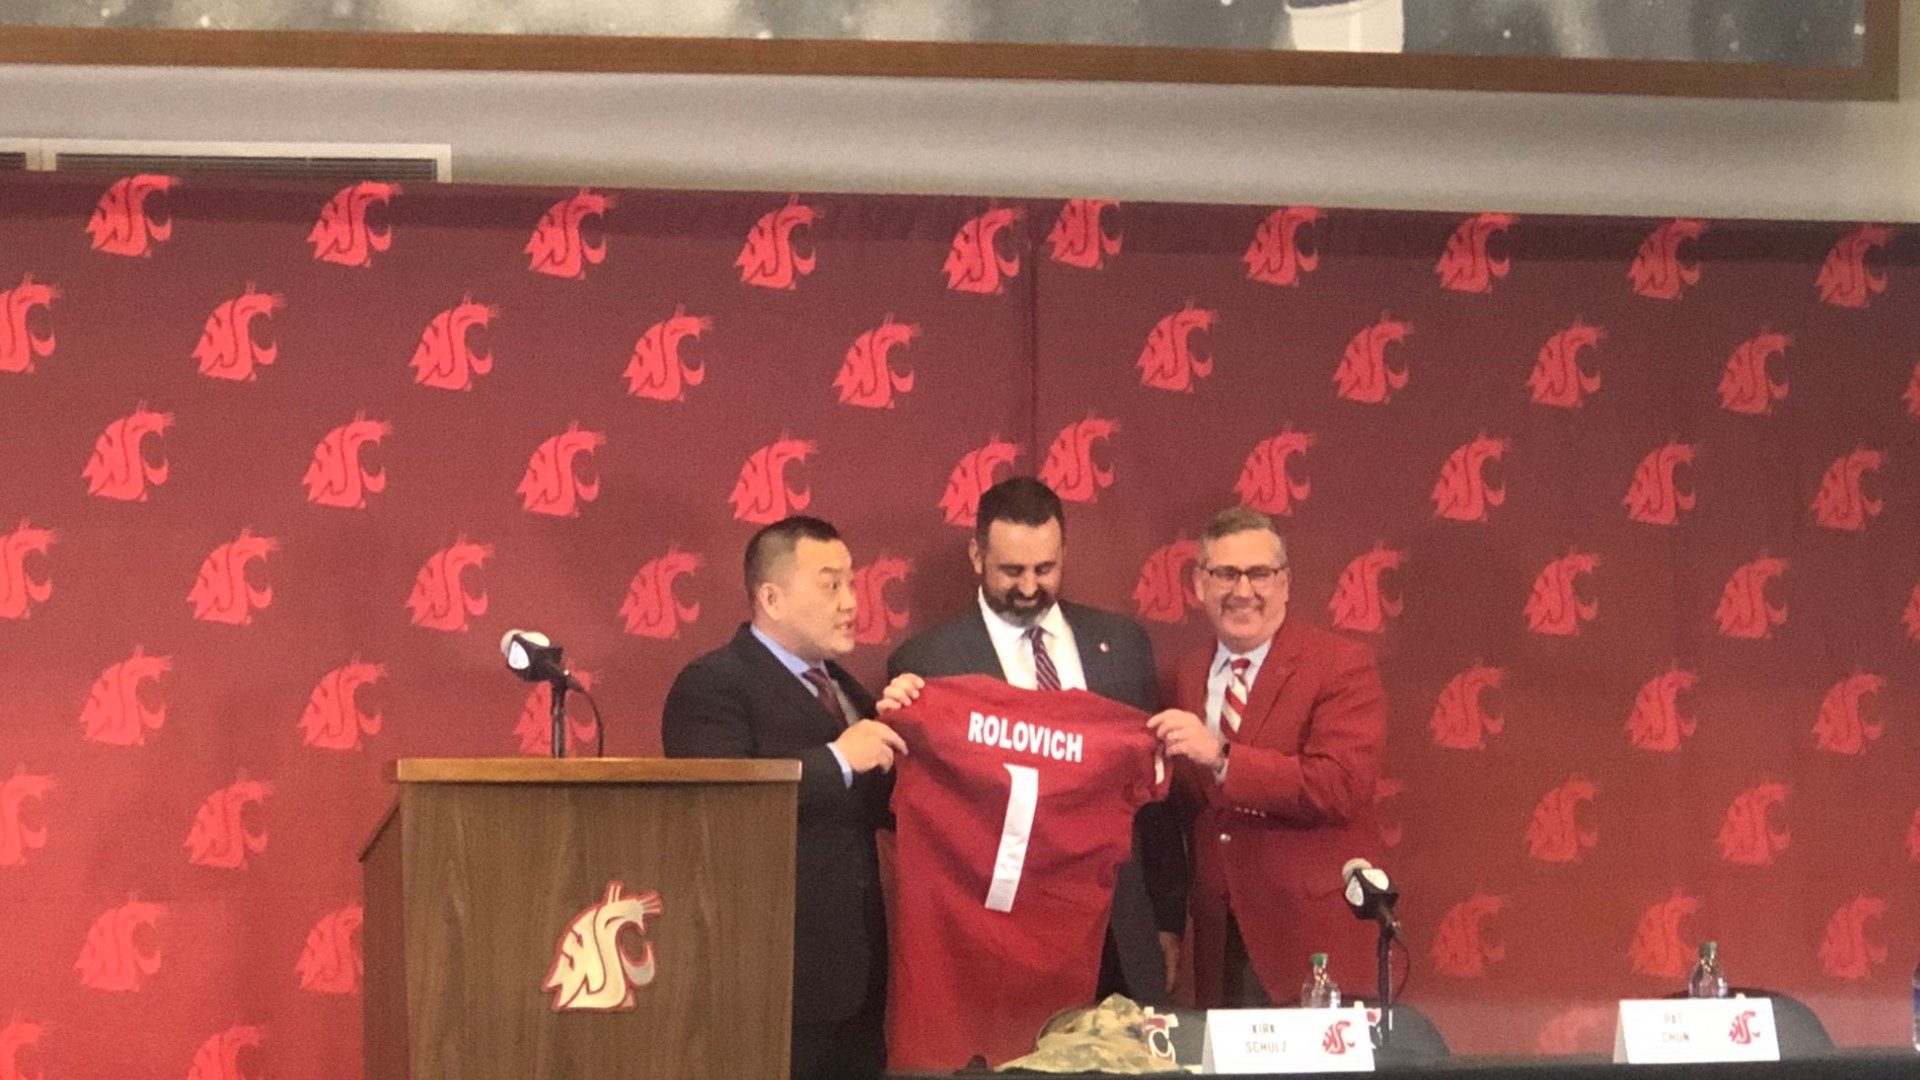 Nick Rolovich was officially introduced to media on Thursday, and spoke about his move to Pullman and his expectations for the team going forward.